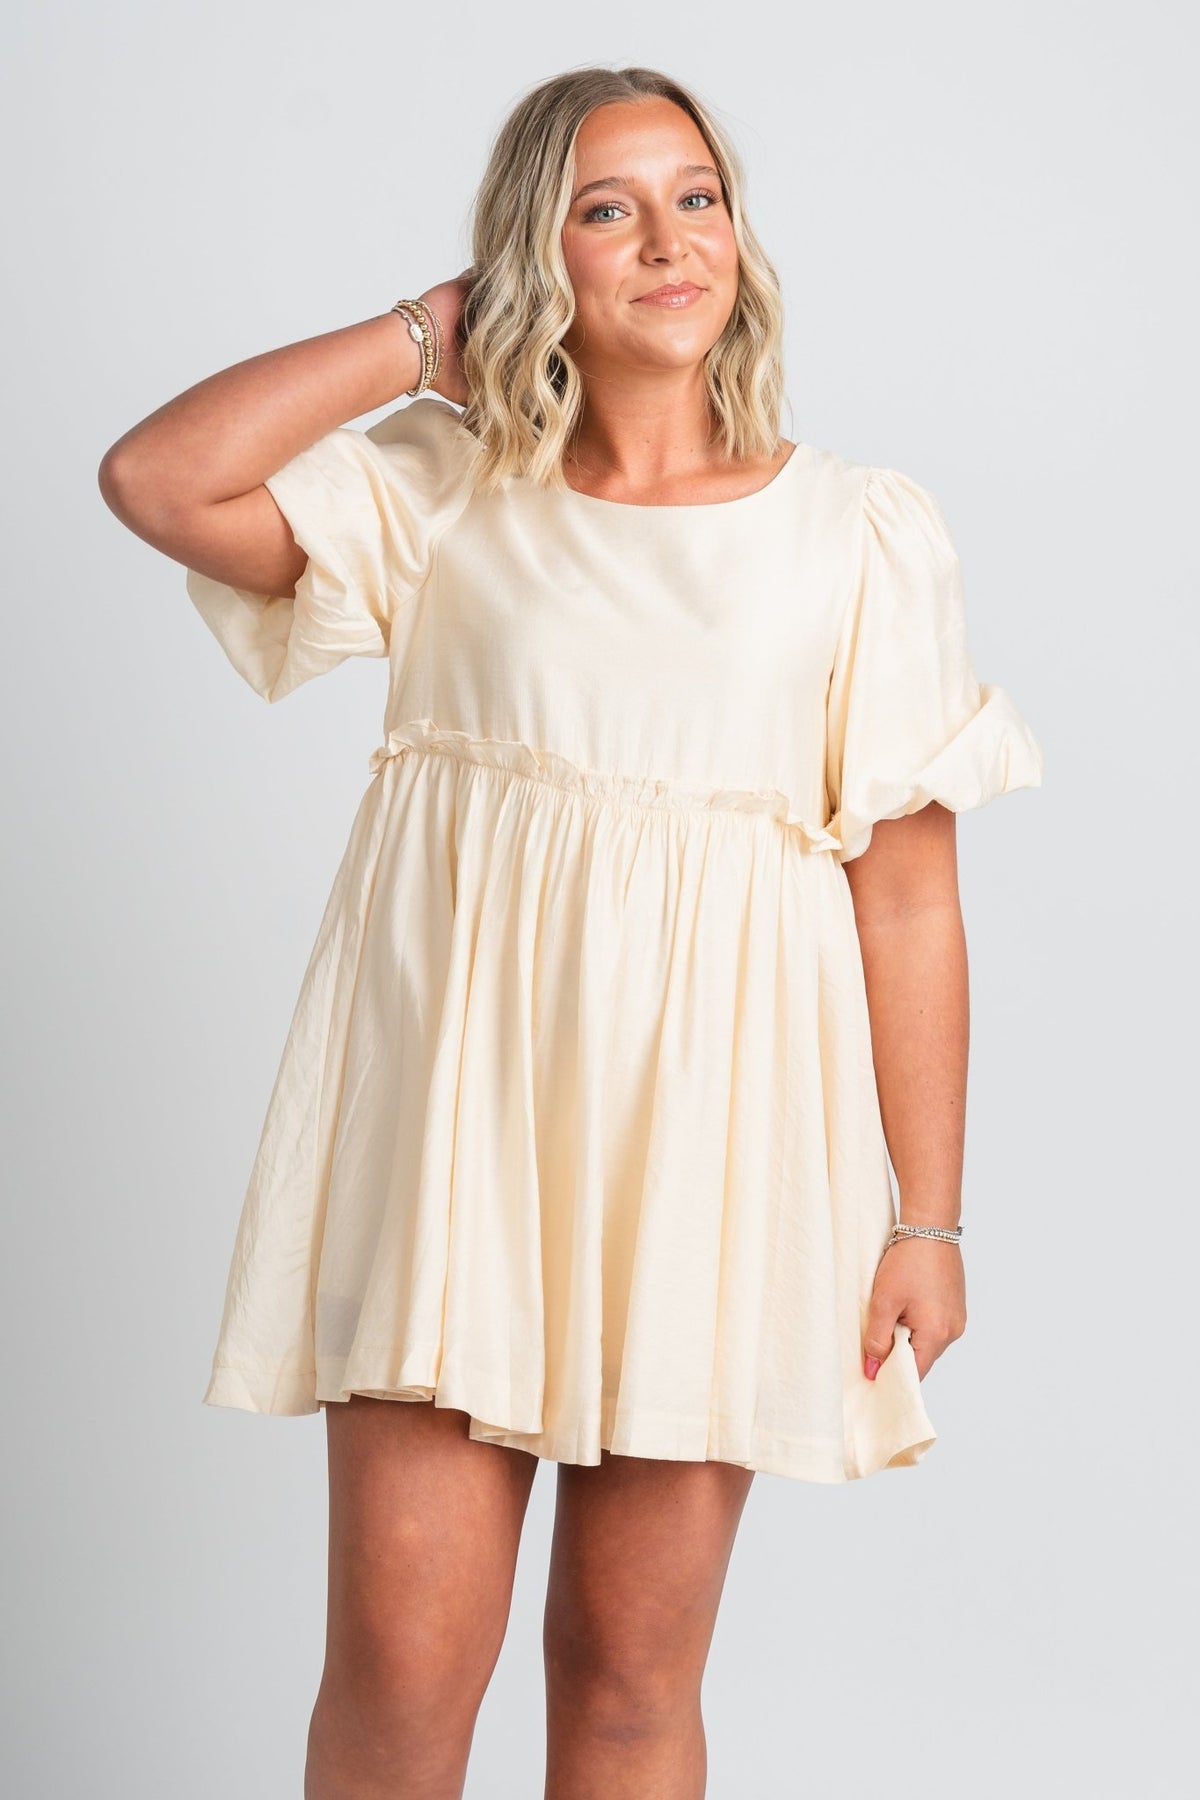 Puff sleeve mini dress cream - Stylish Dress - Cute Easter Outfits at Lush Fashion Lounge Boutique in Oklahoma